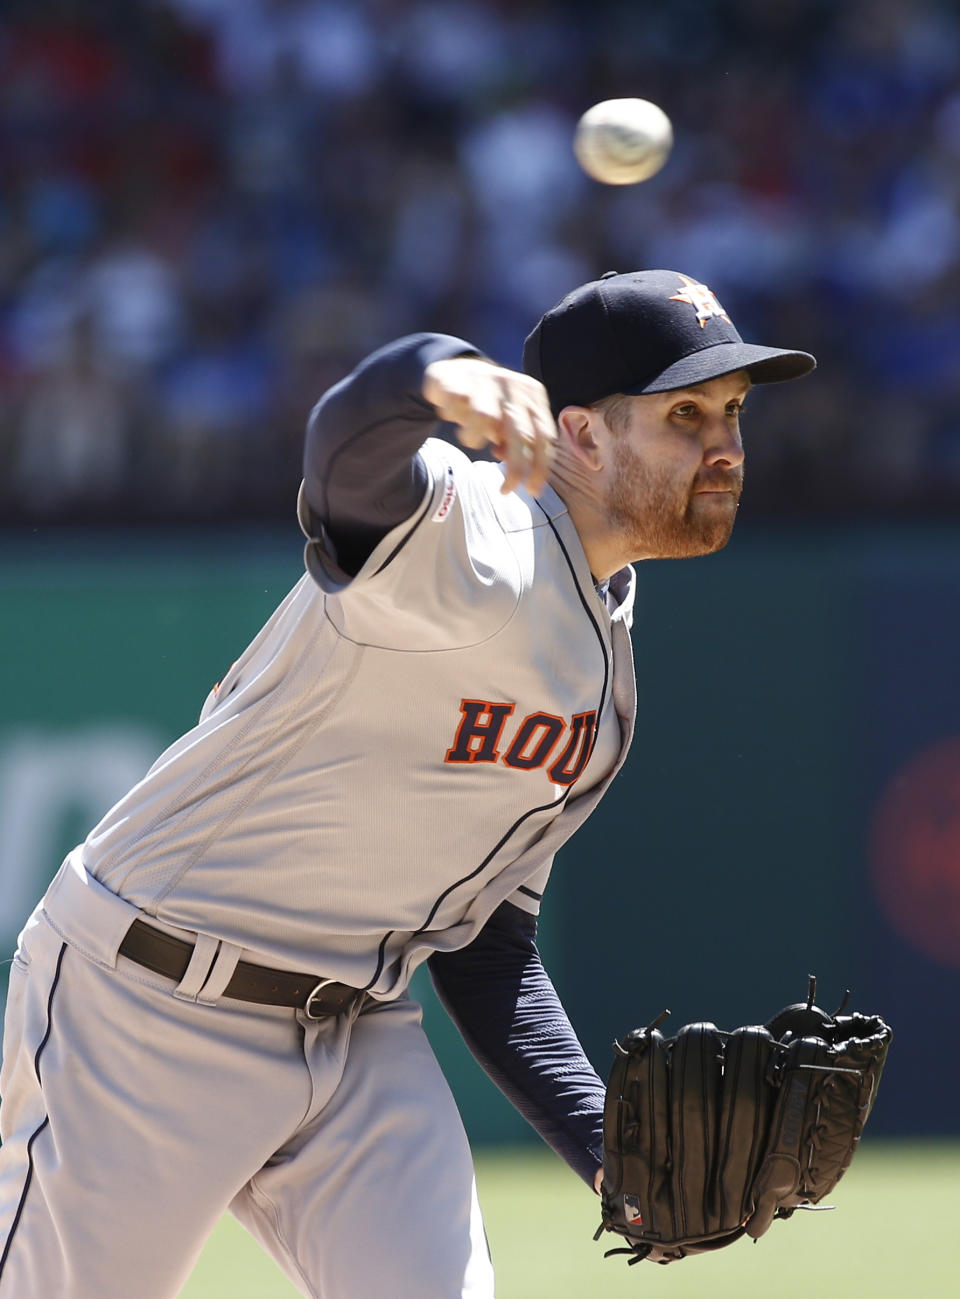 Houston Astros starting pitcher Collin McHugh delivers against the Texas Rangers during the first inning of a baseball game Sunday, April 21, 2019, in Arlington, Texas. (AP Photo/Mike Stone)